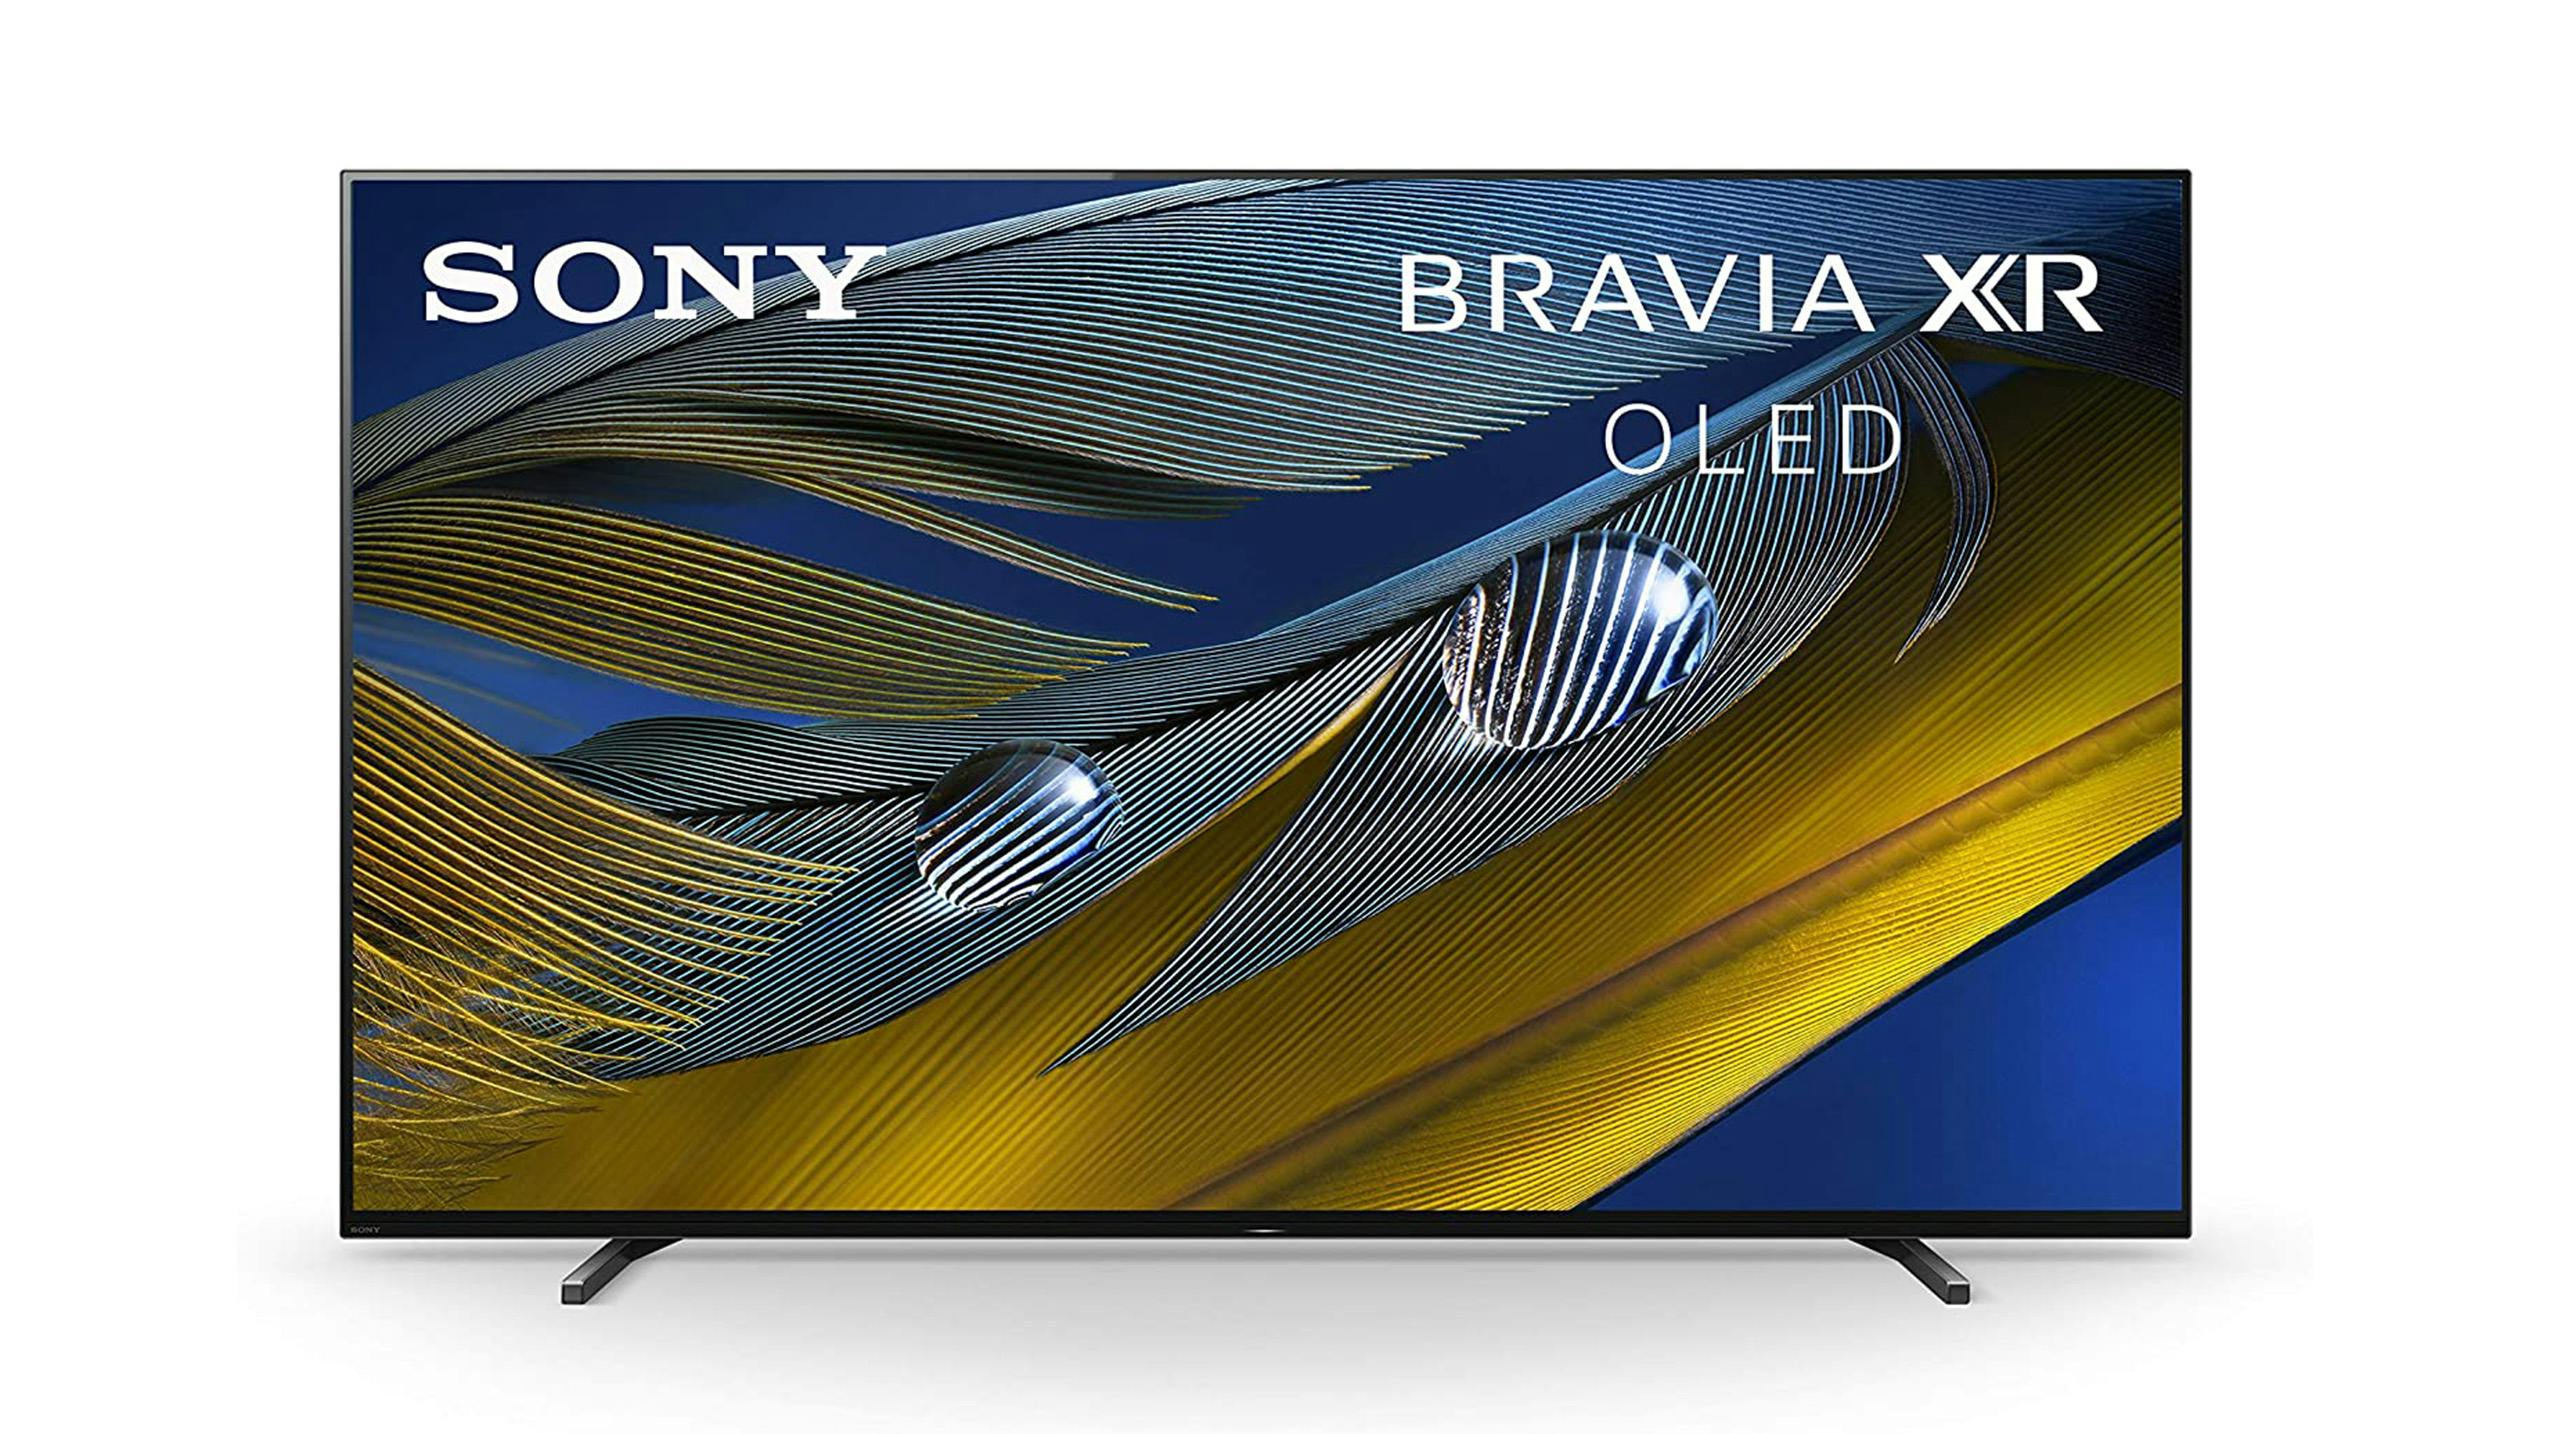 A Sony Bravia XR OLED TV product image.